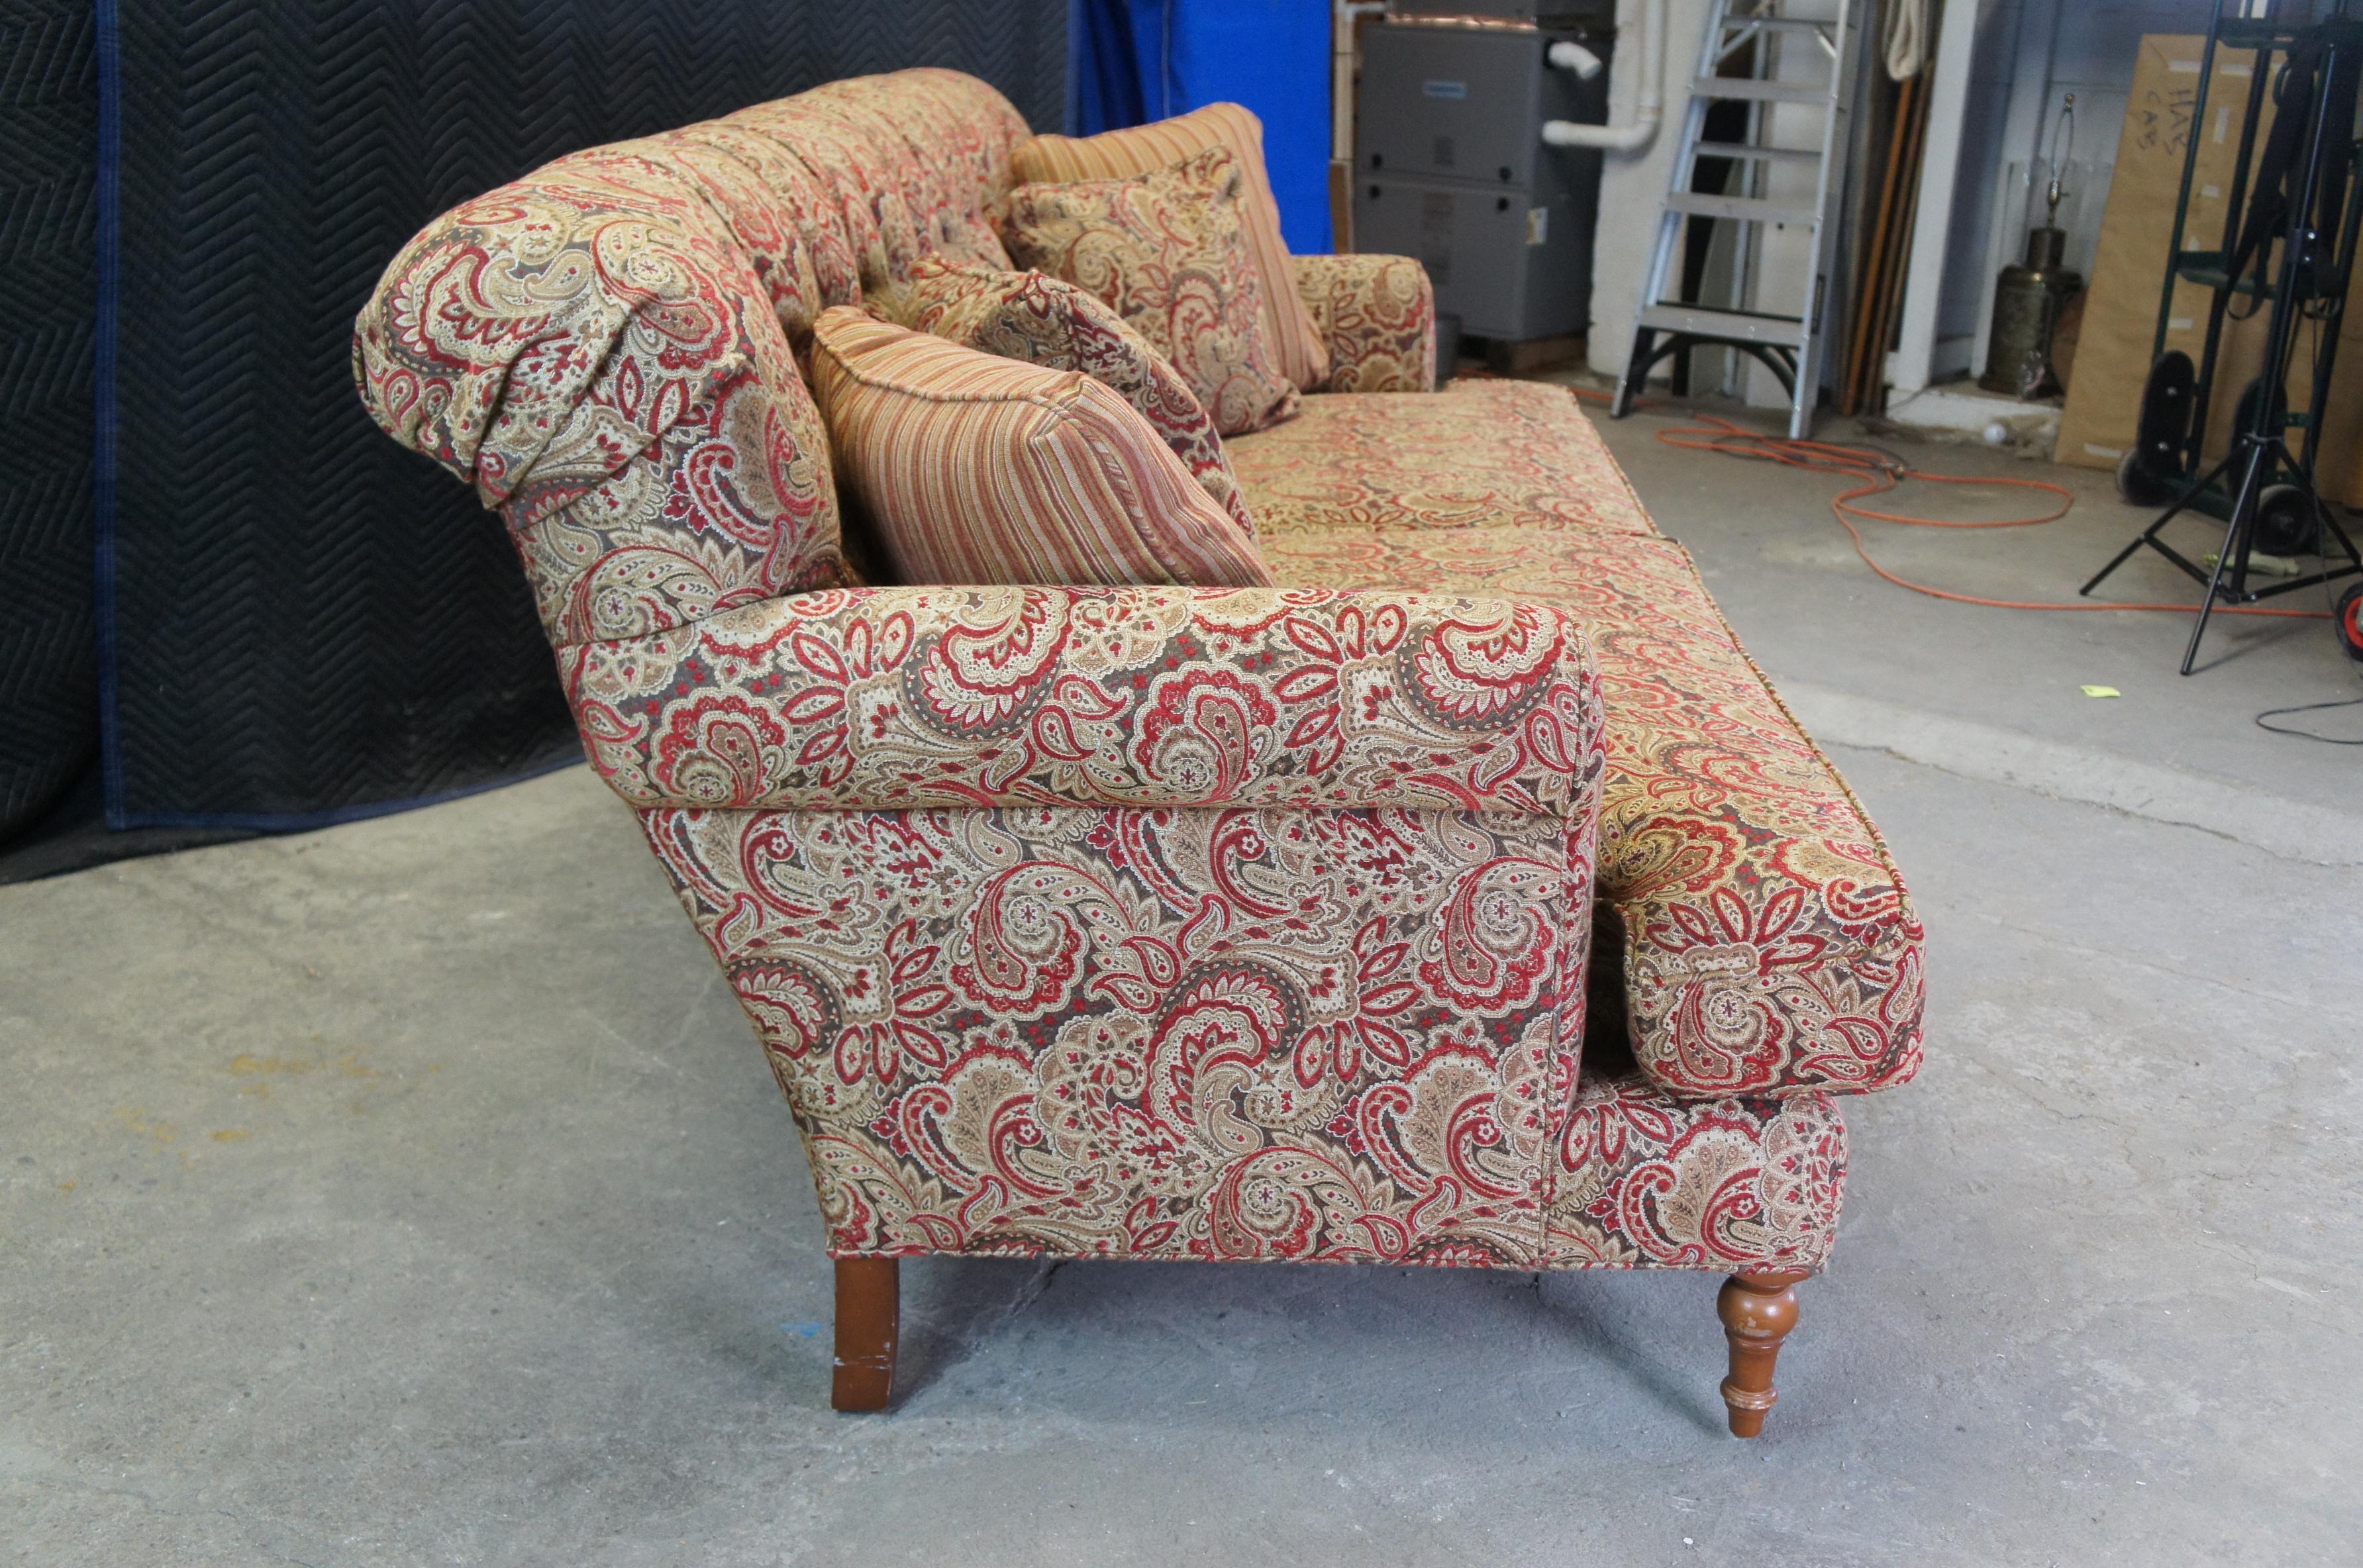 Vintage Arhaus Cambridge Collection Tufted Paisley Upholstered Sofa Couch 97 For Sale 3